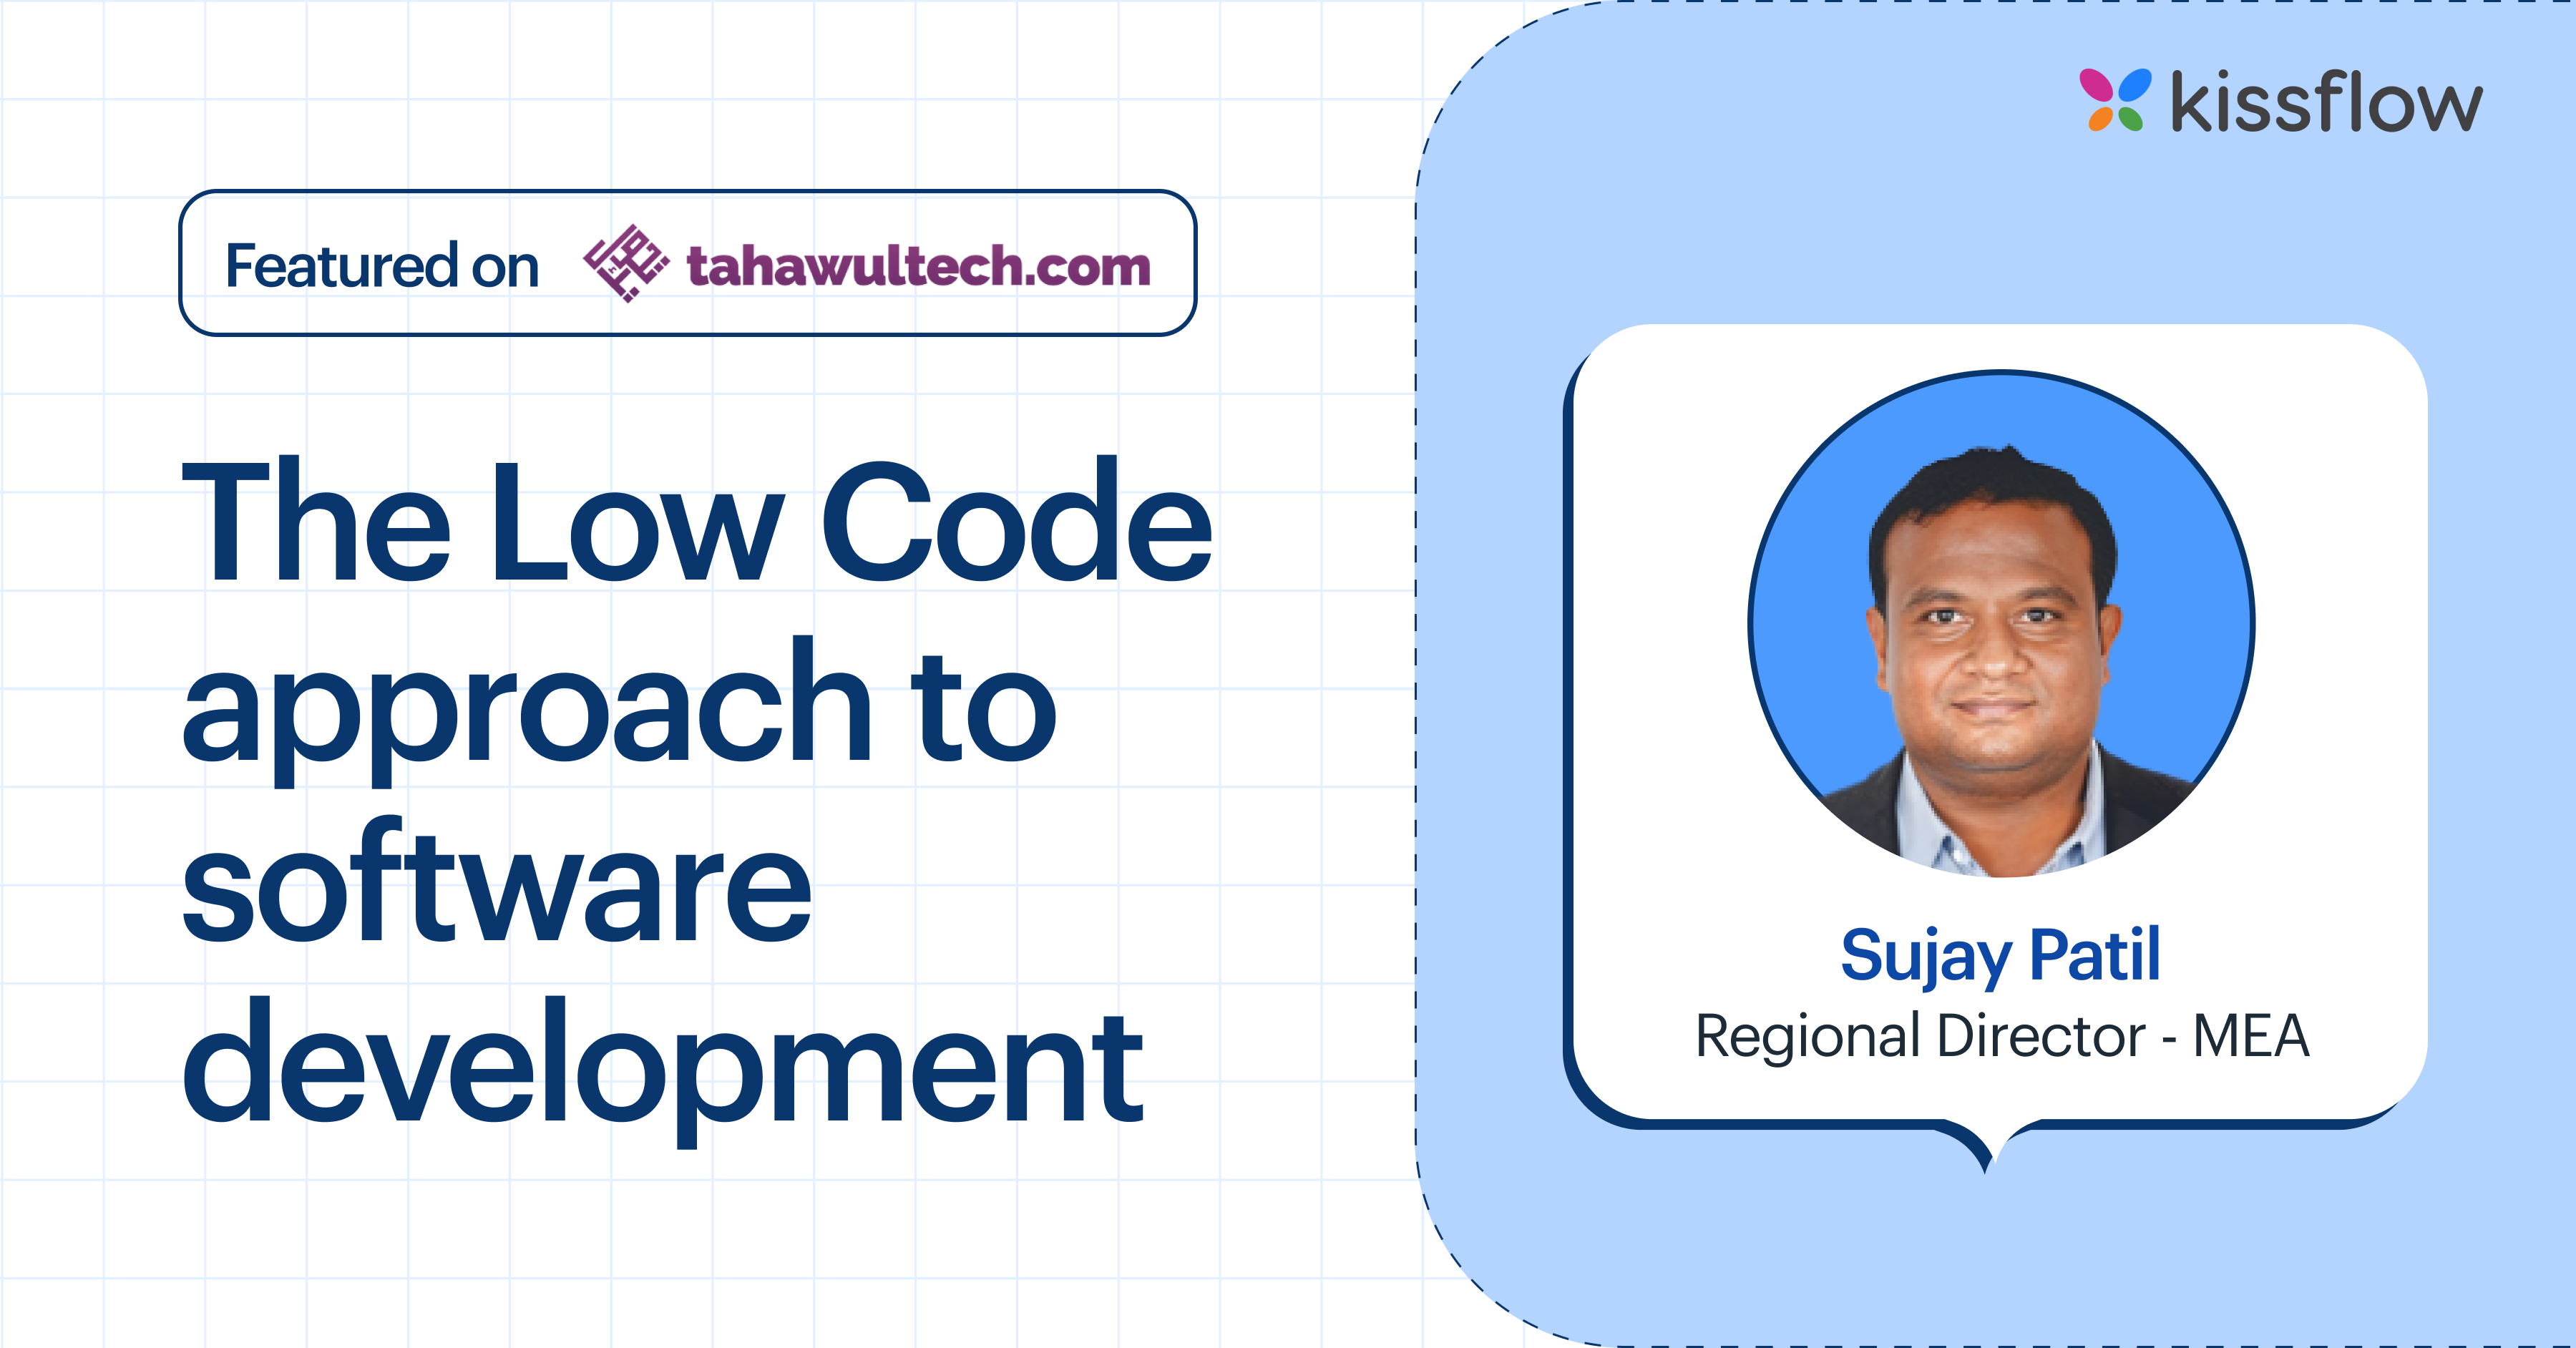 The Low Code approach to software development